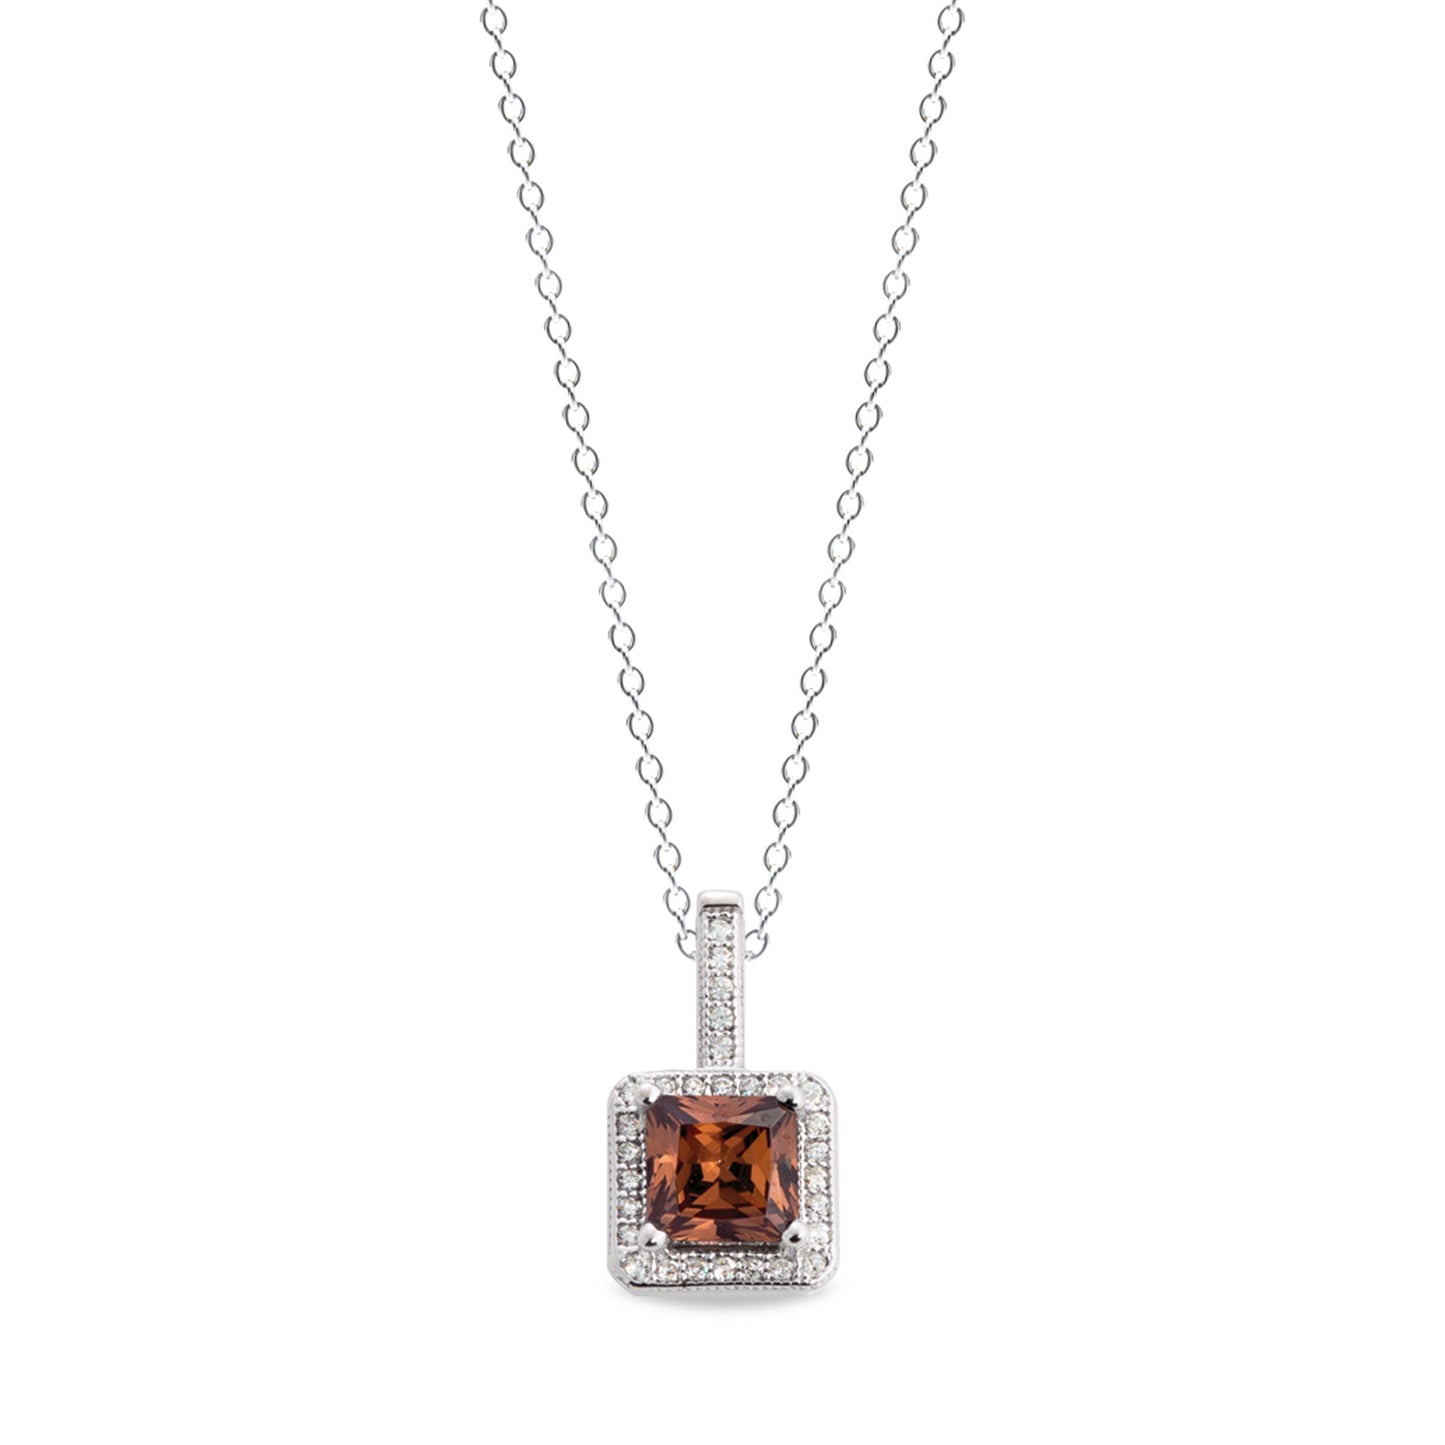 A princess cut brown pendant with simulated diamonds displayed on a neutral white background.